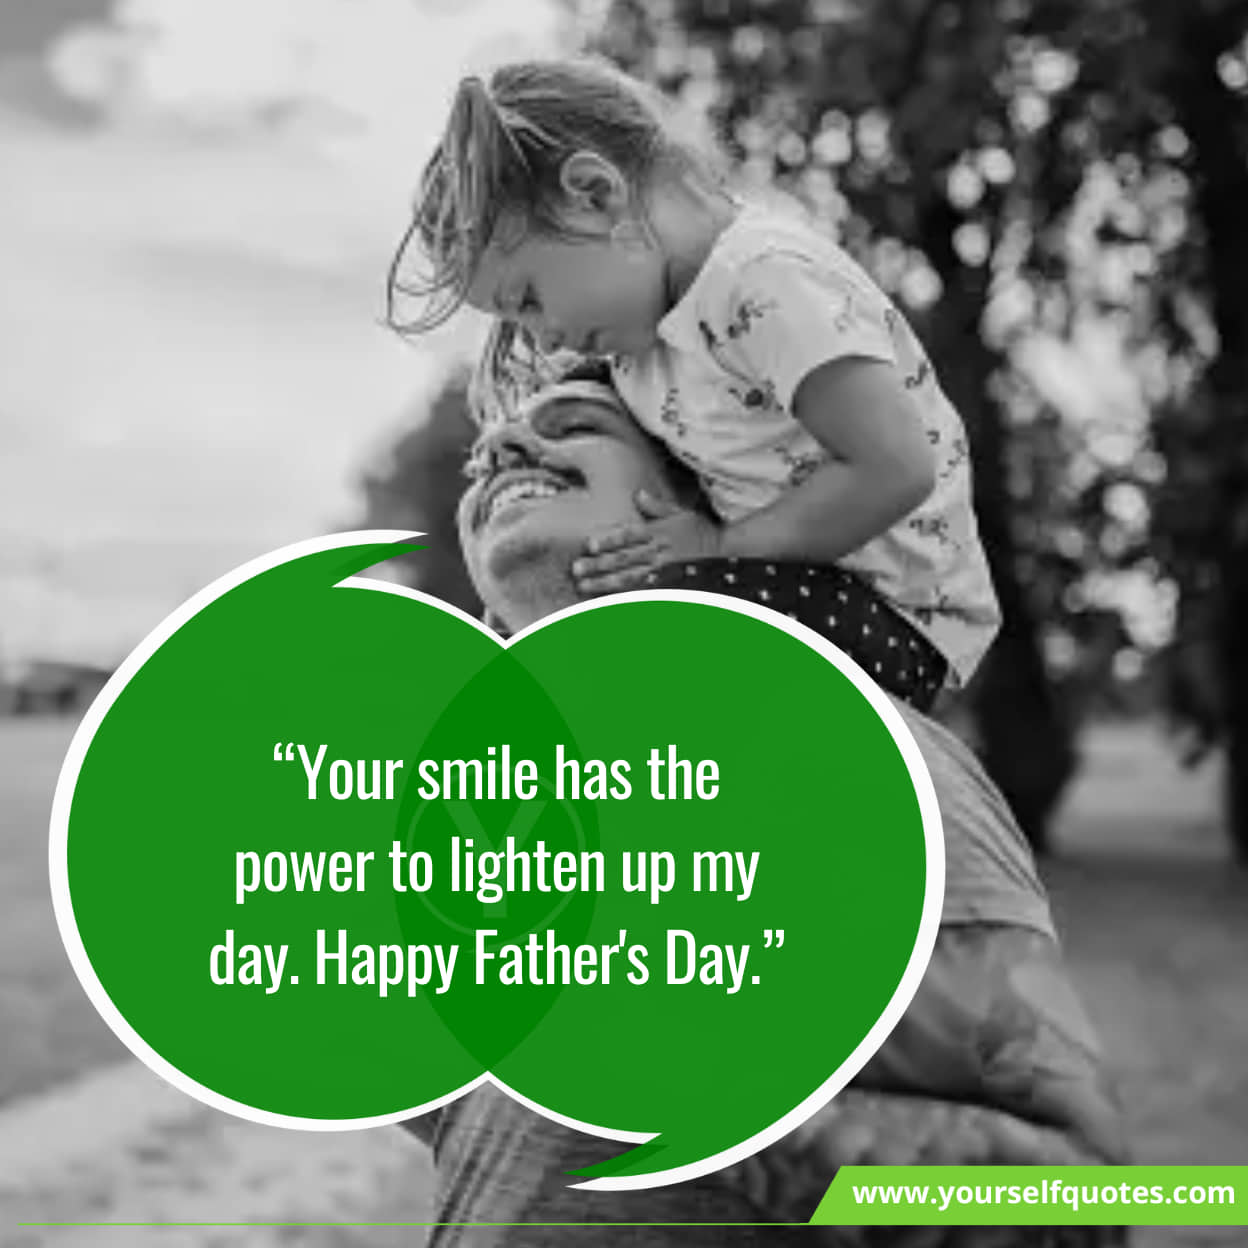 Warm wishes for a wonderful father on Father's Day